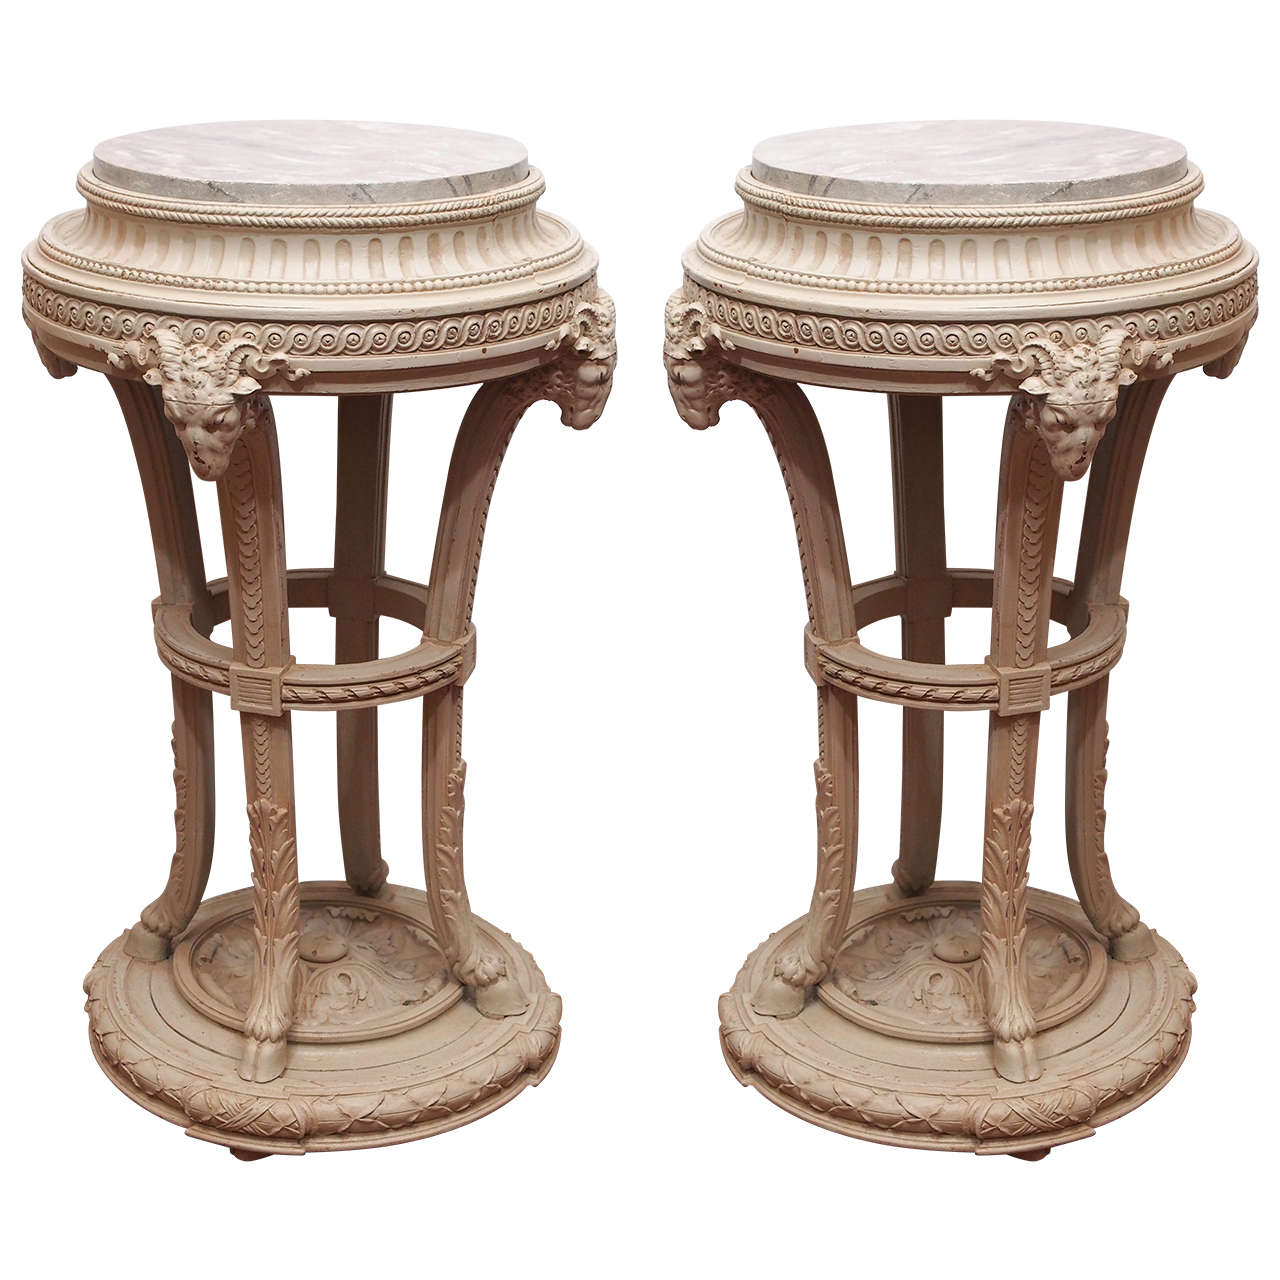 Pair of Louis XVI Style Painted Fishbowl Stands